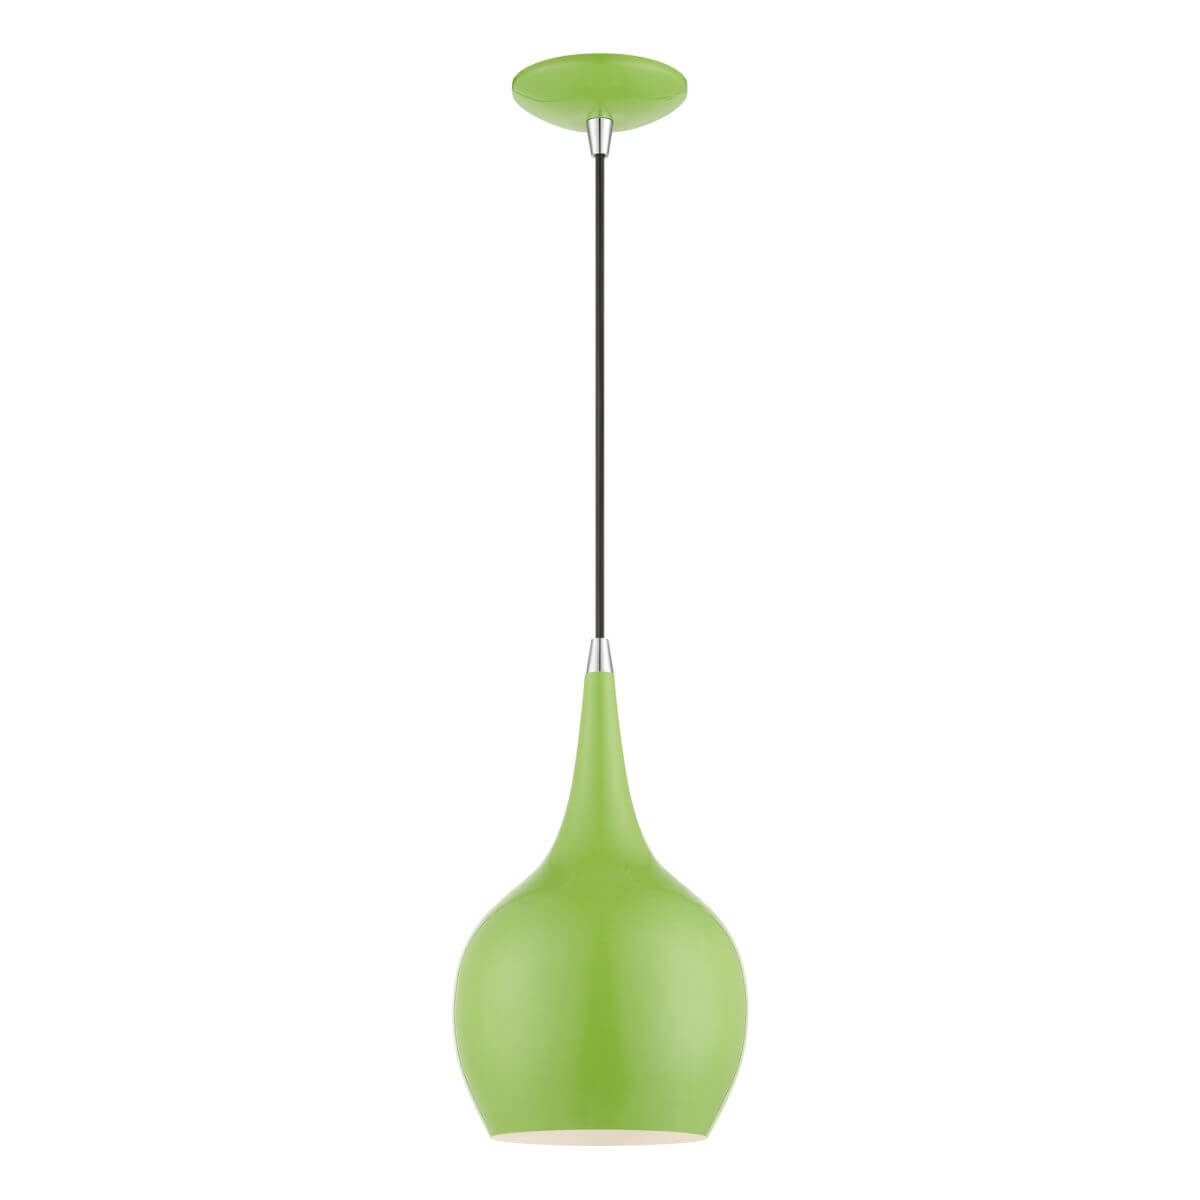 Livex 49016-78 Andes 1 Light 8 inch Mini Pendant in Shiny Apple Green-Polished Chrome Accents